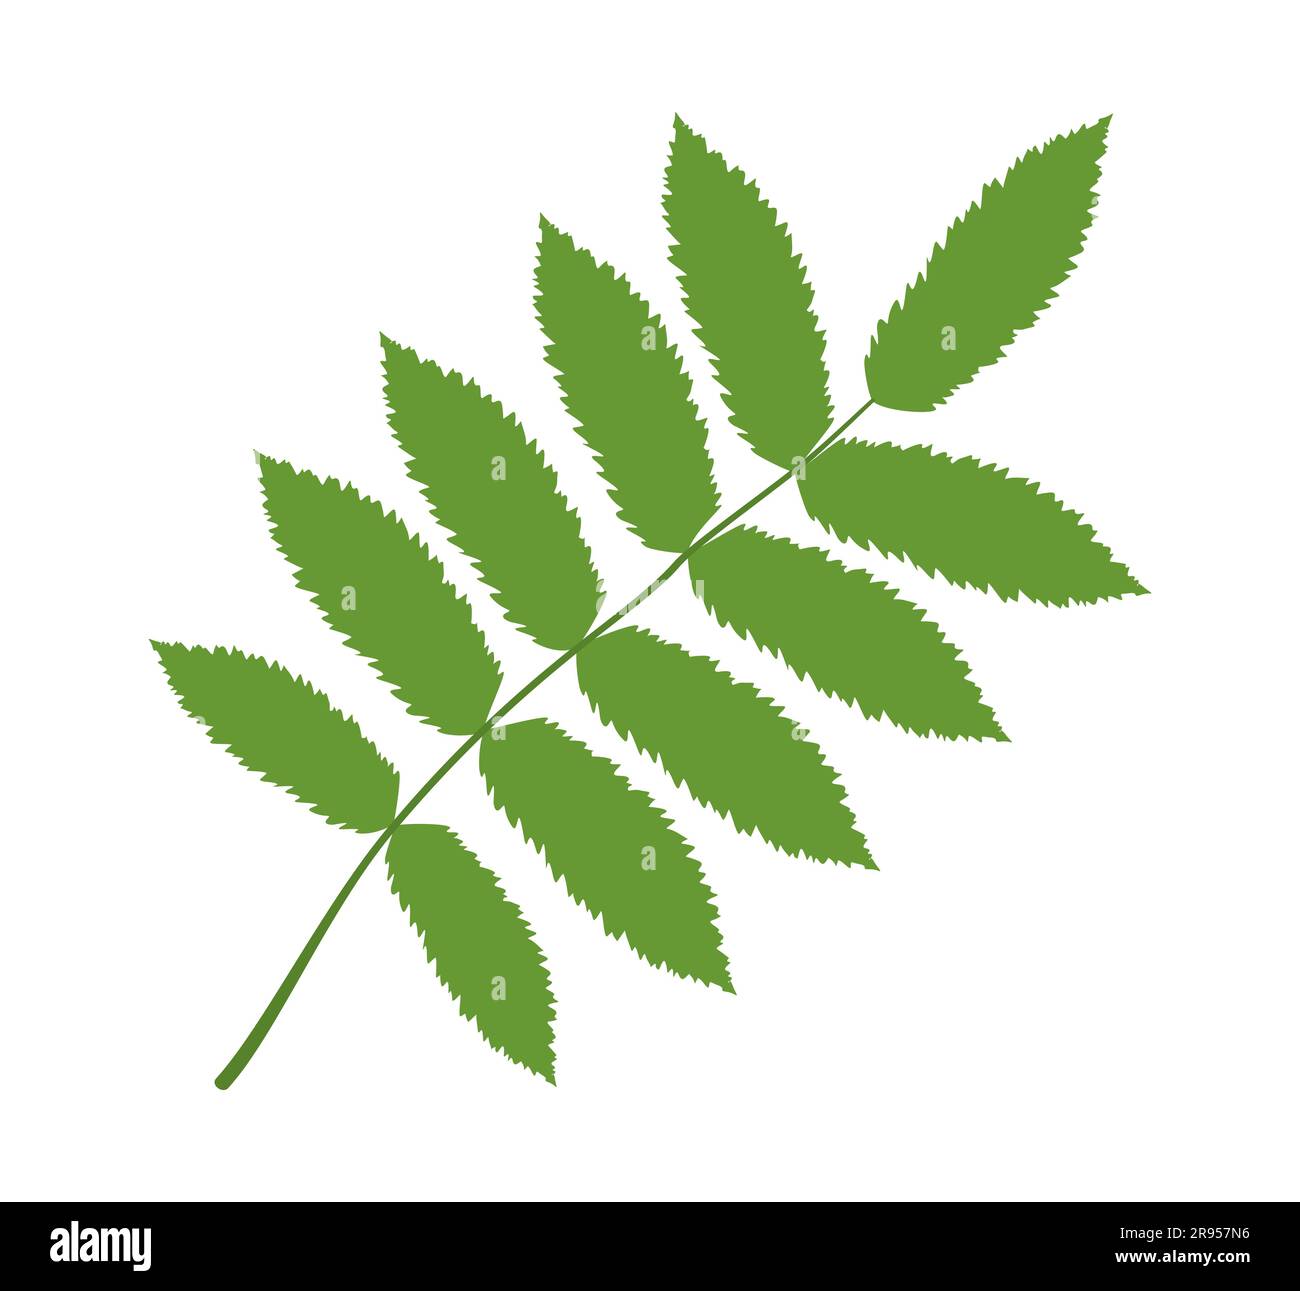 Vector illustration of a green rowan leaf on a white background Stock Vector